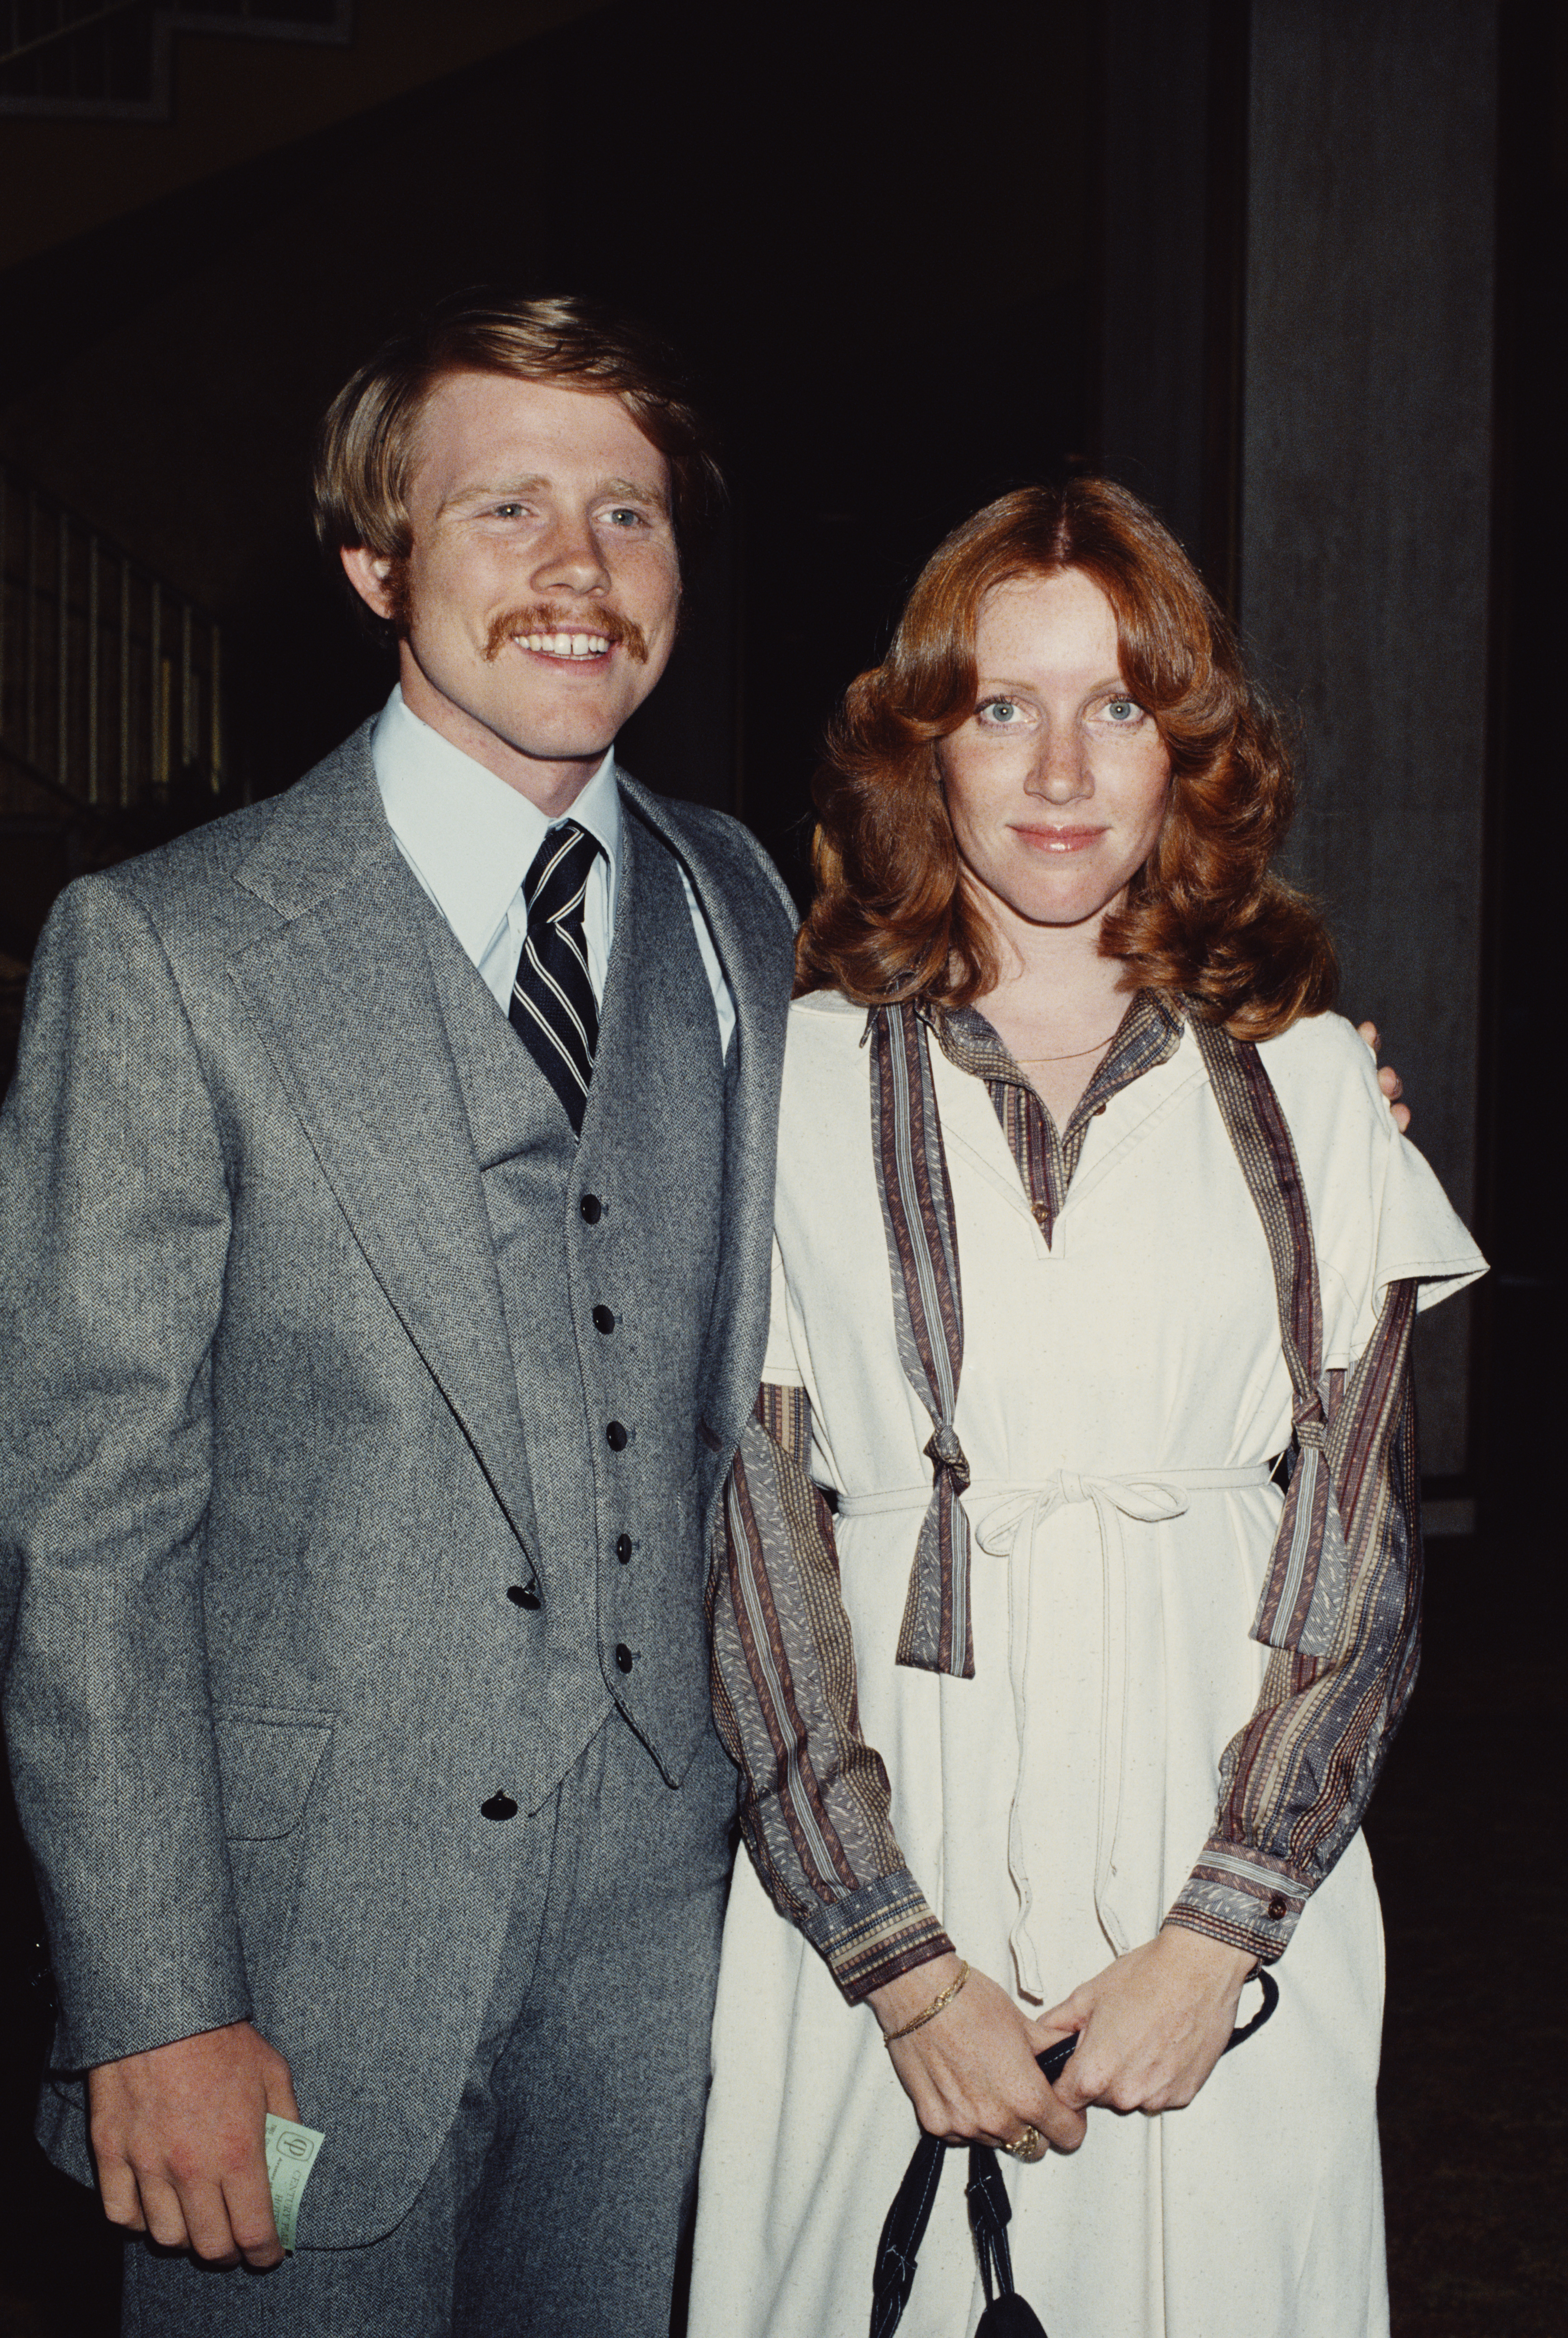 American actor and director Ron Howard with his wife Cheryl, circa 1980. | Source: Getty Images